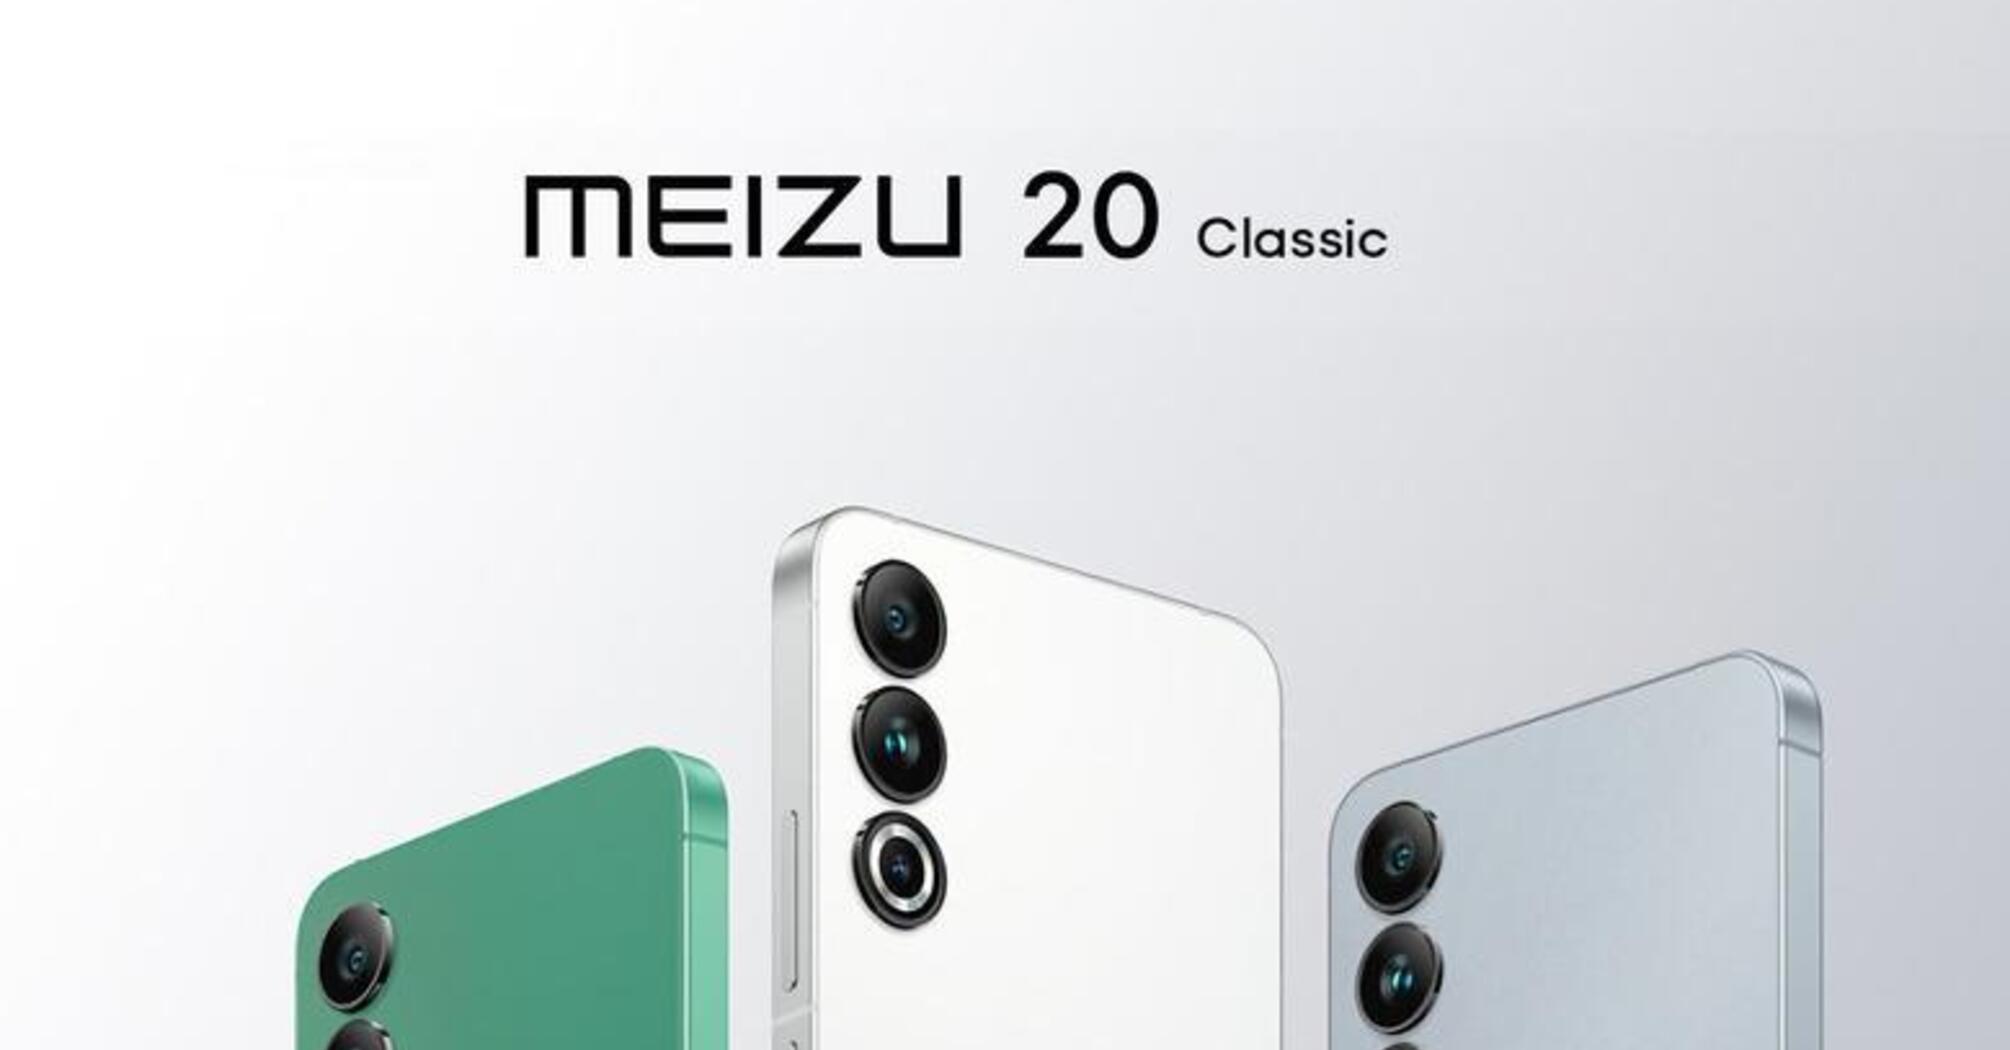 A look into the future of smartphones: what's new in Meizu 20 Classic